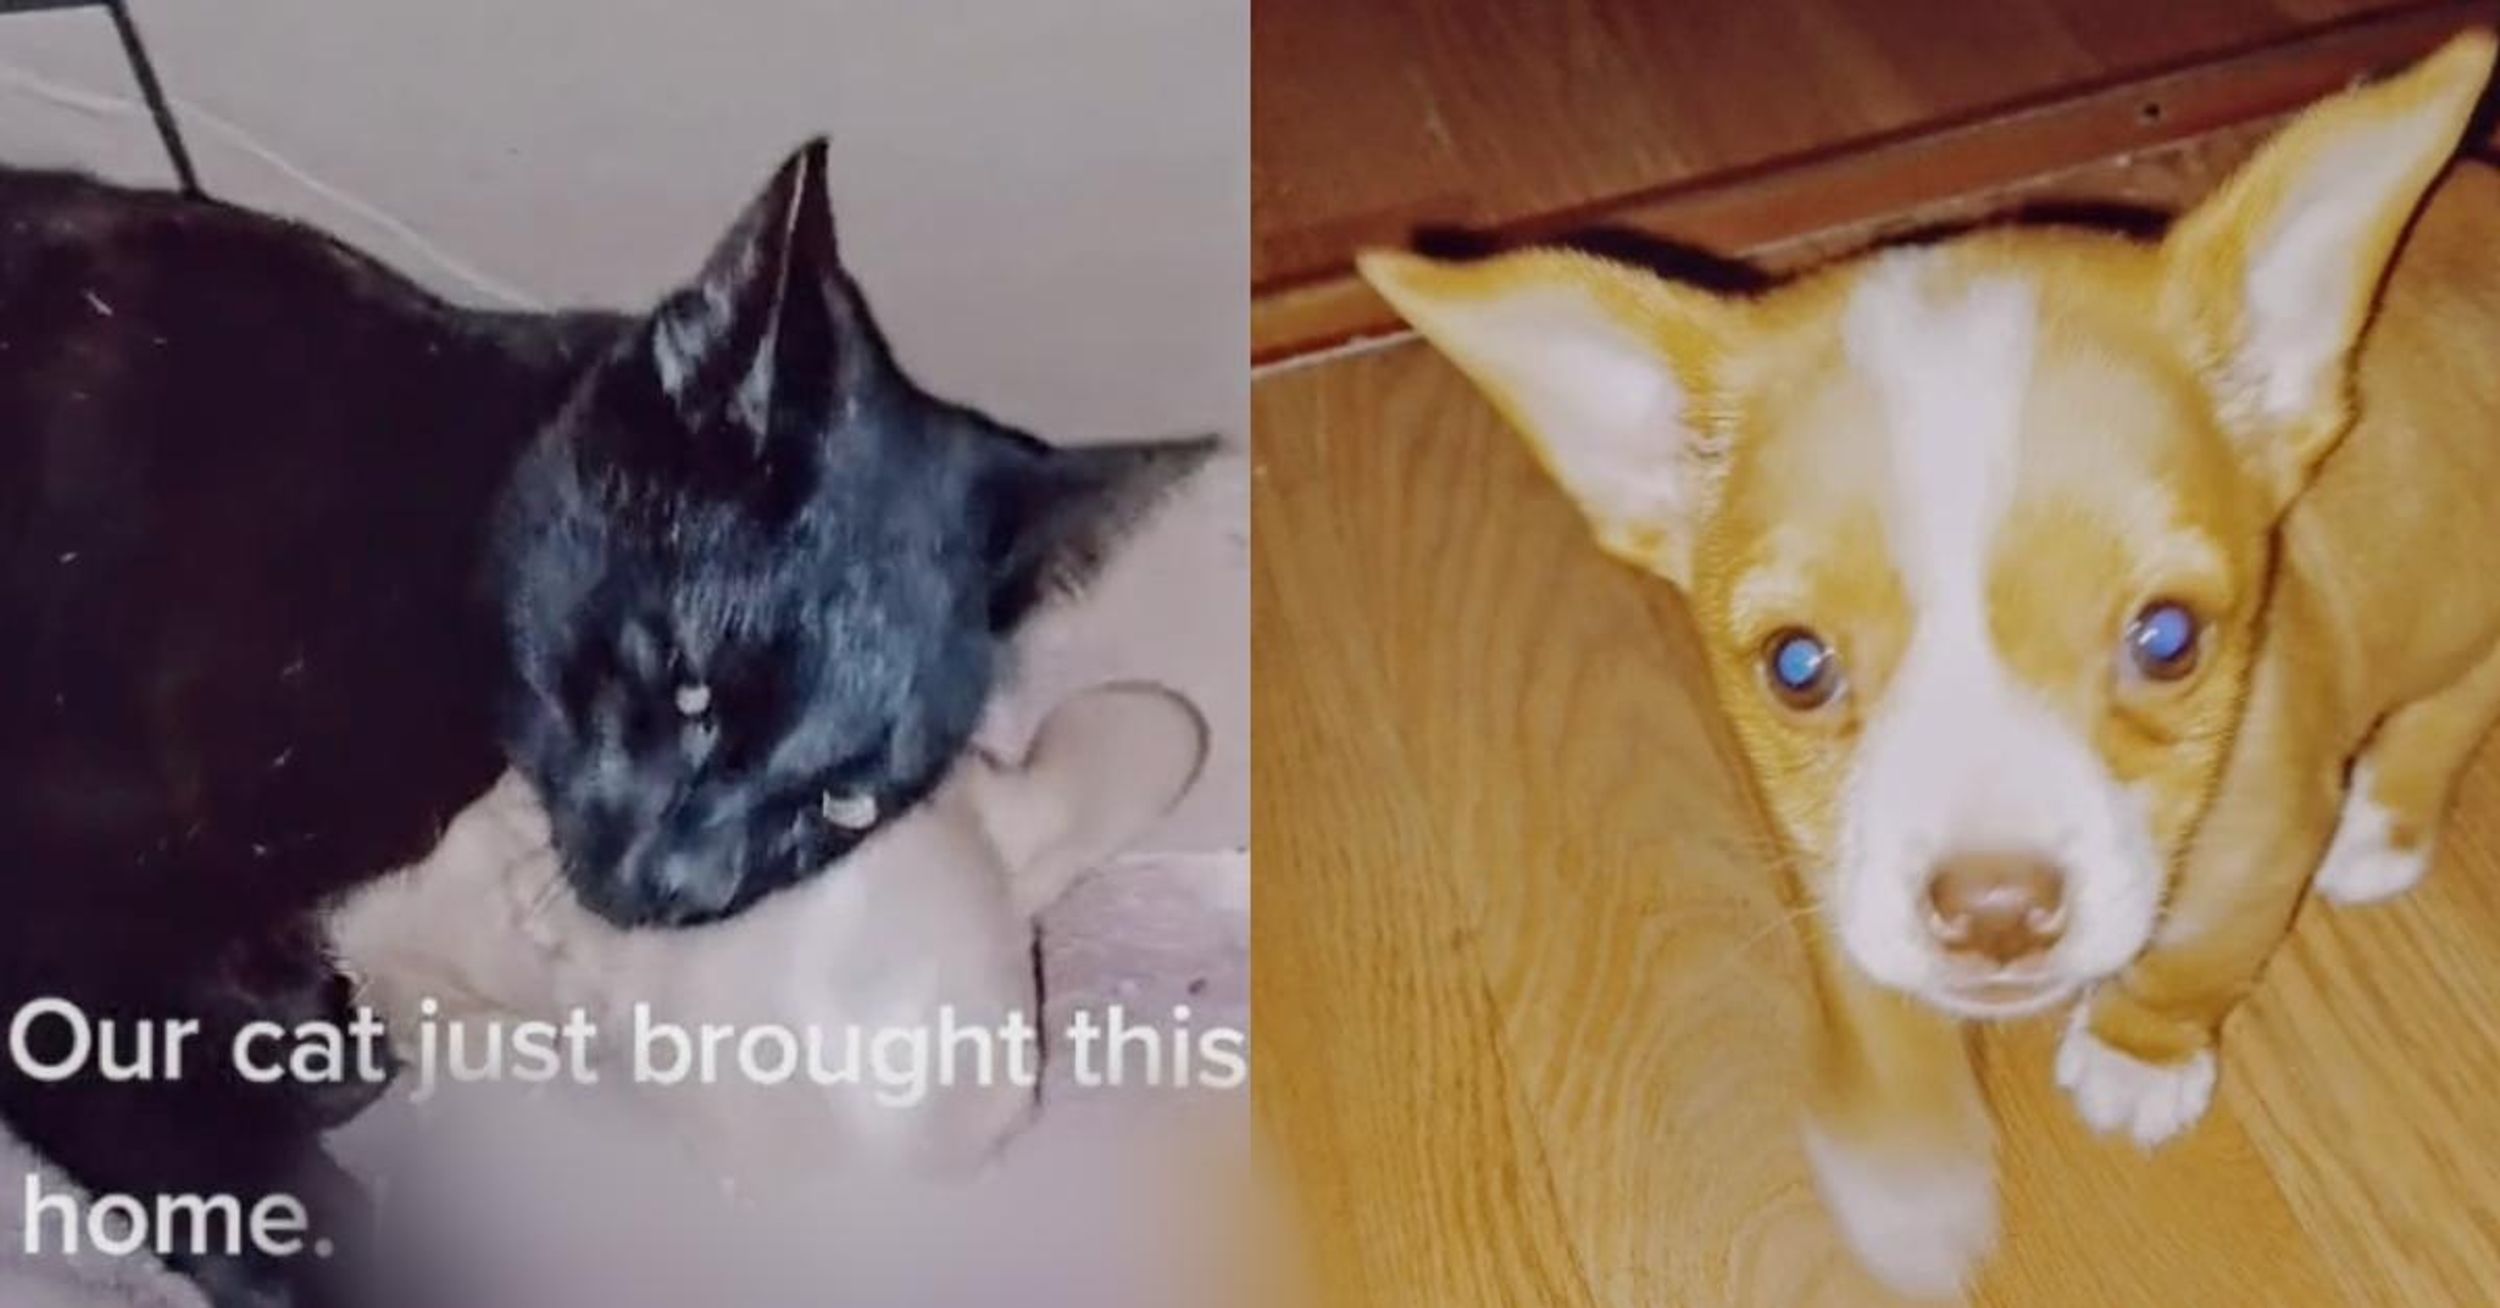 TikToker Stunned After Cat Brings Home 'Huge Rat' In Its Mouth—But It Turns Out To Be A Puppy